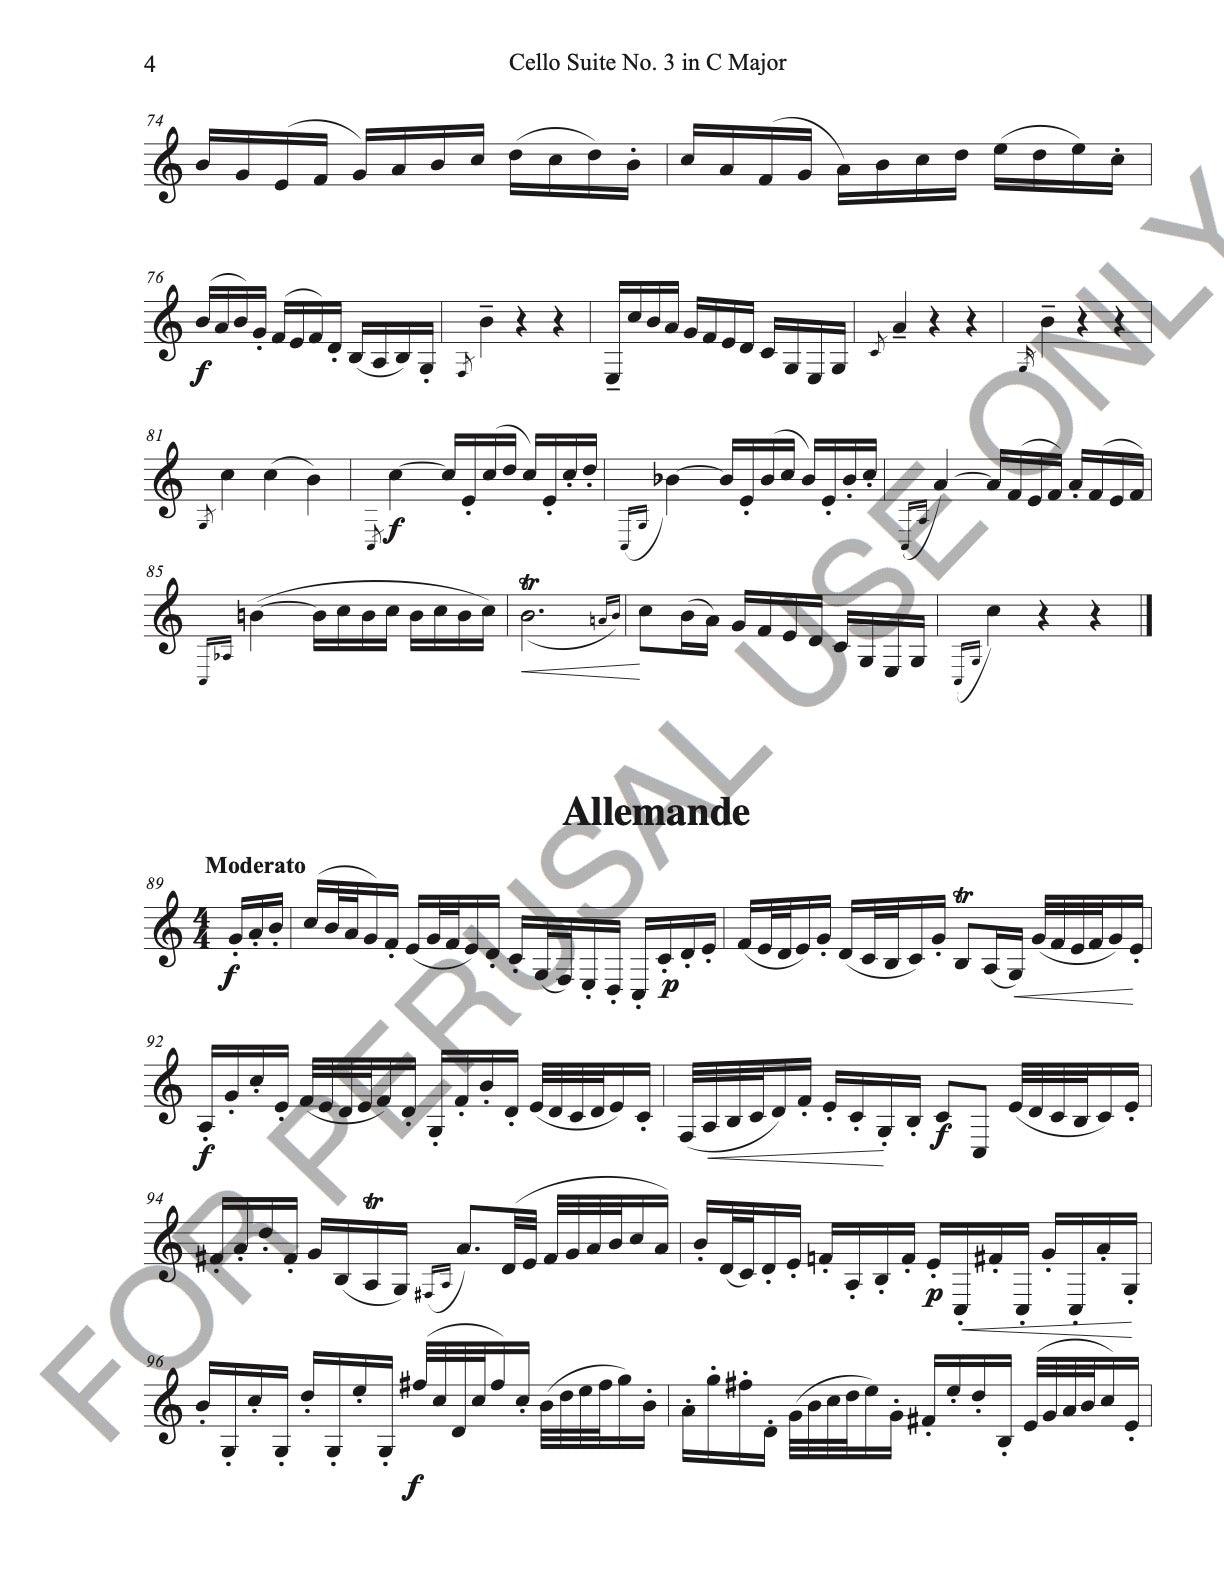 Bass Clarinet Solo sheet music: Complete Bach's Cello Suite no.3 - ChaipruckMekara